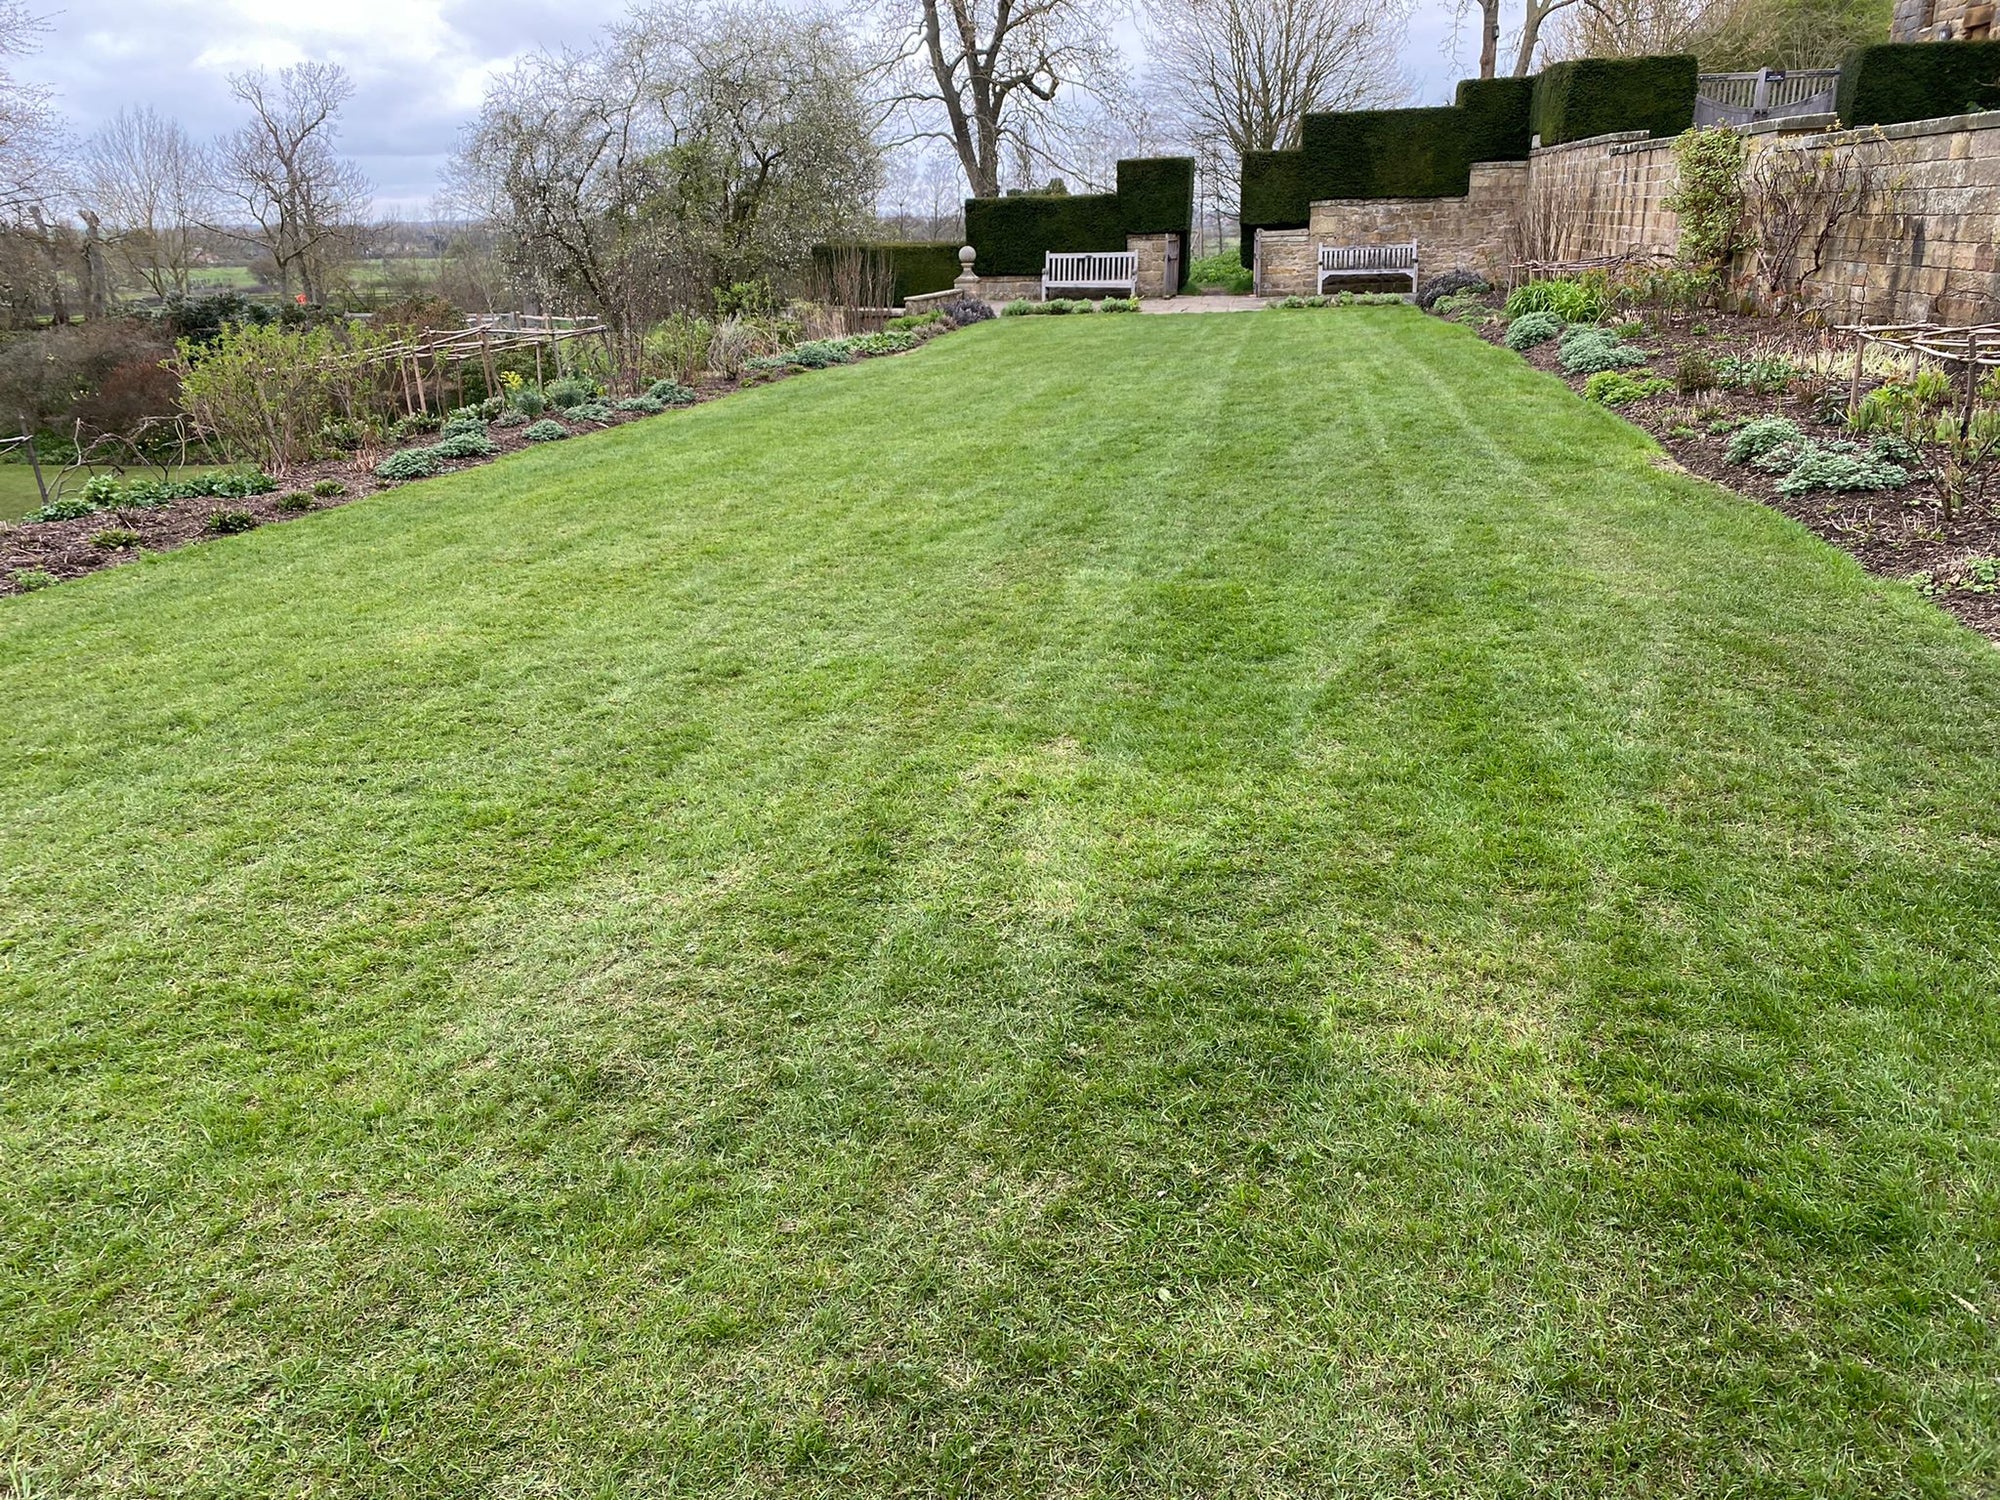 The Importance of Overseeding and Adding New Plants to Your Lawn